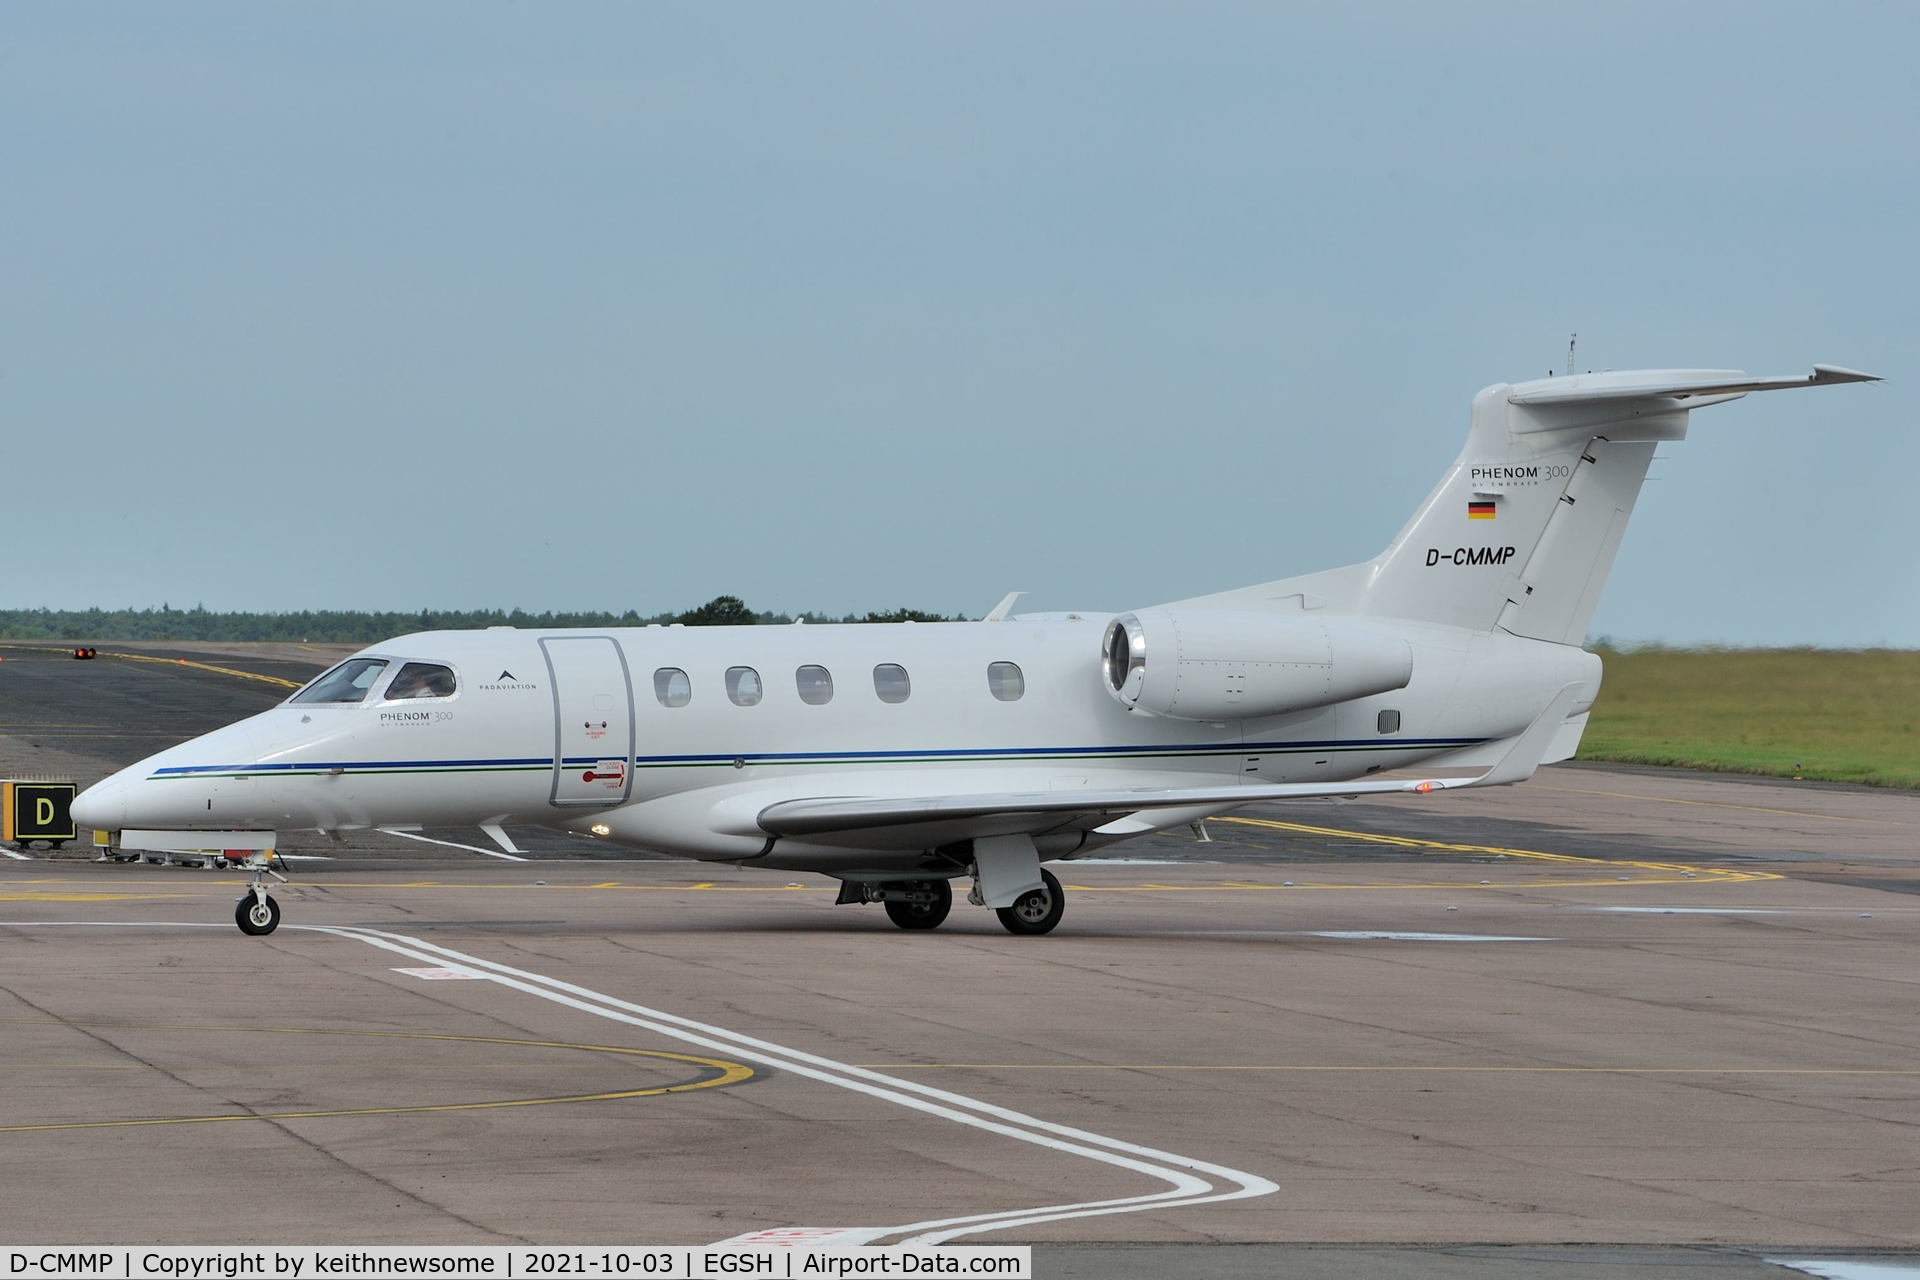 D-CMMP, 2016 Embraer EMB-505 Phenom 300 C/N 50500360, Arriving at Norwich from Avignon, France.